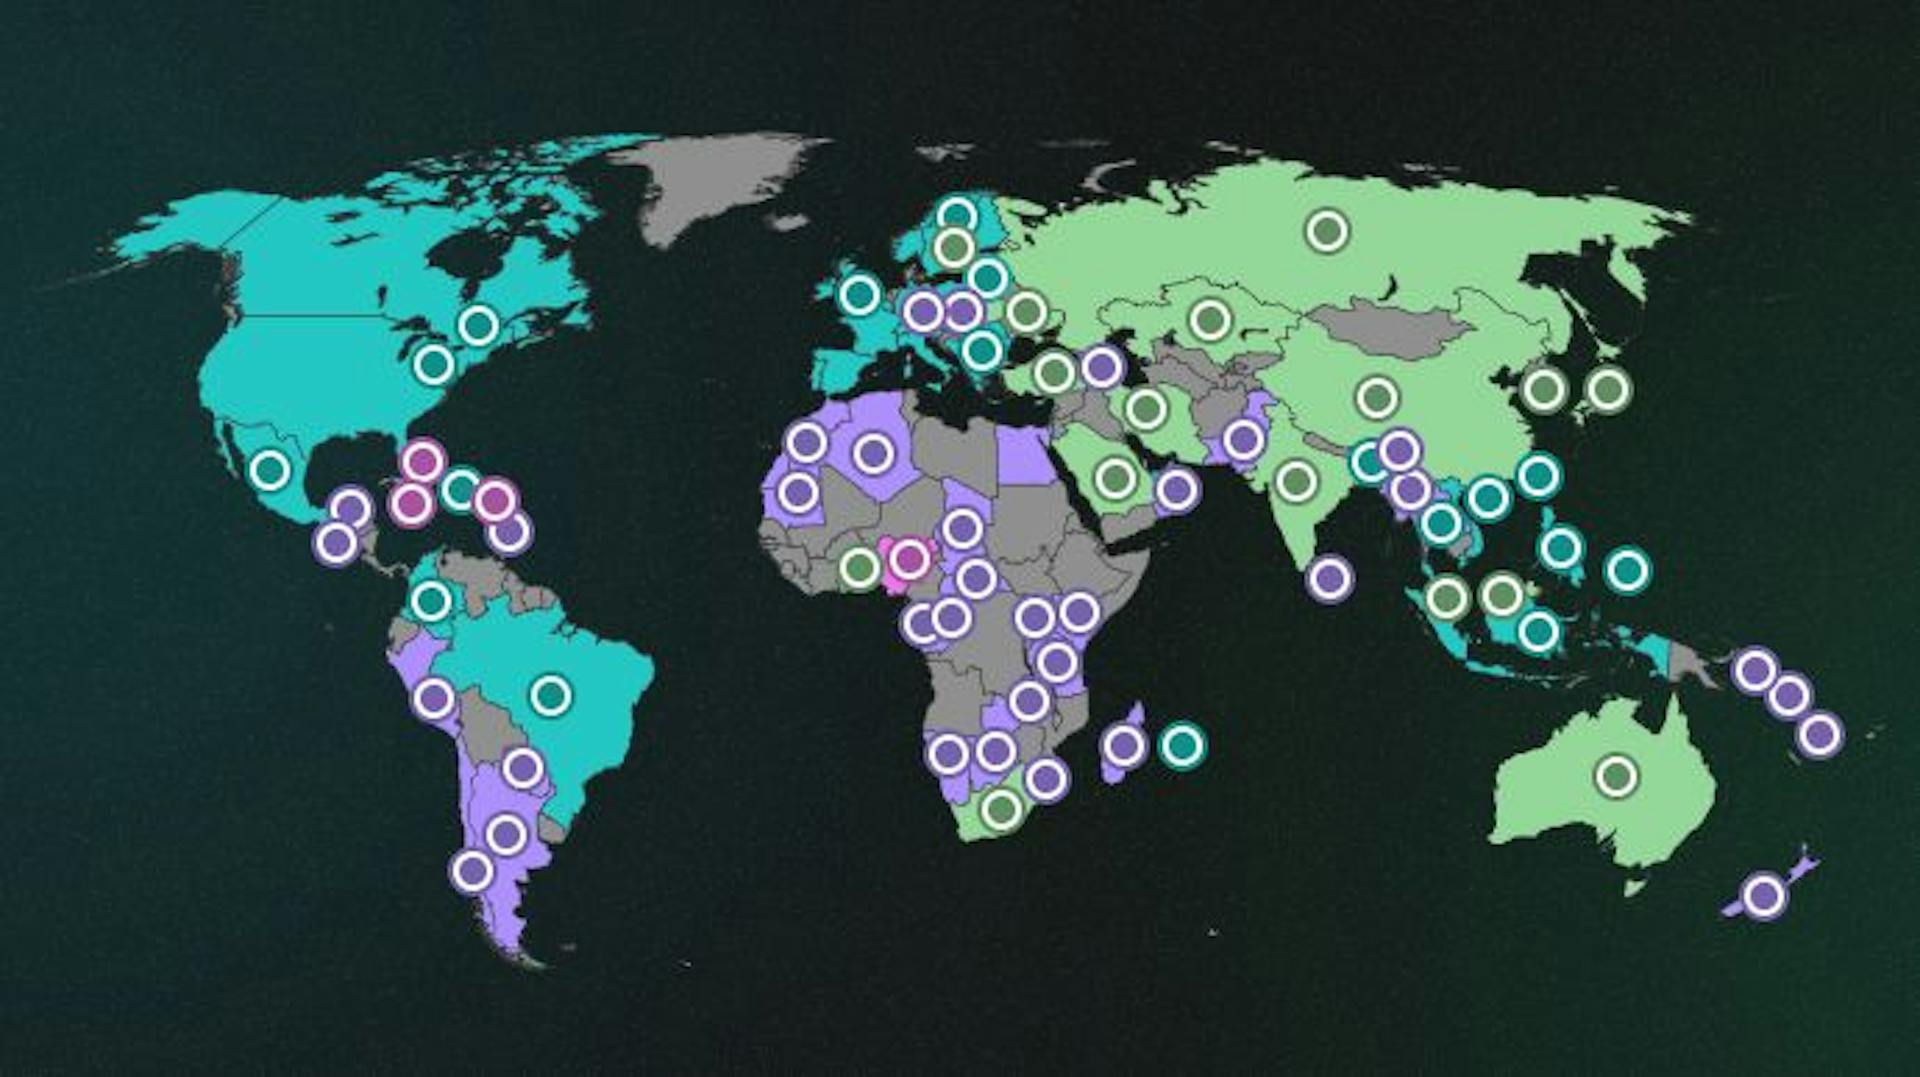 The map highlights countries that are in stages from research to complete launch